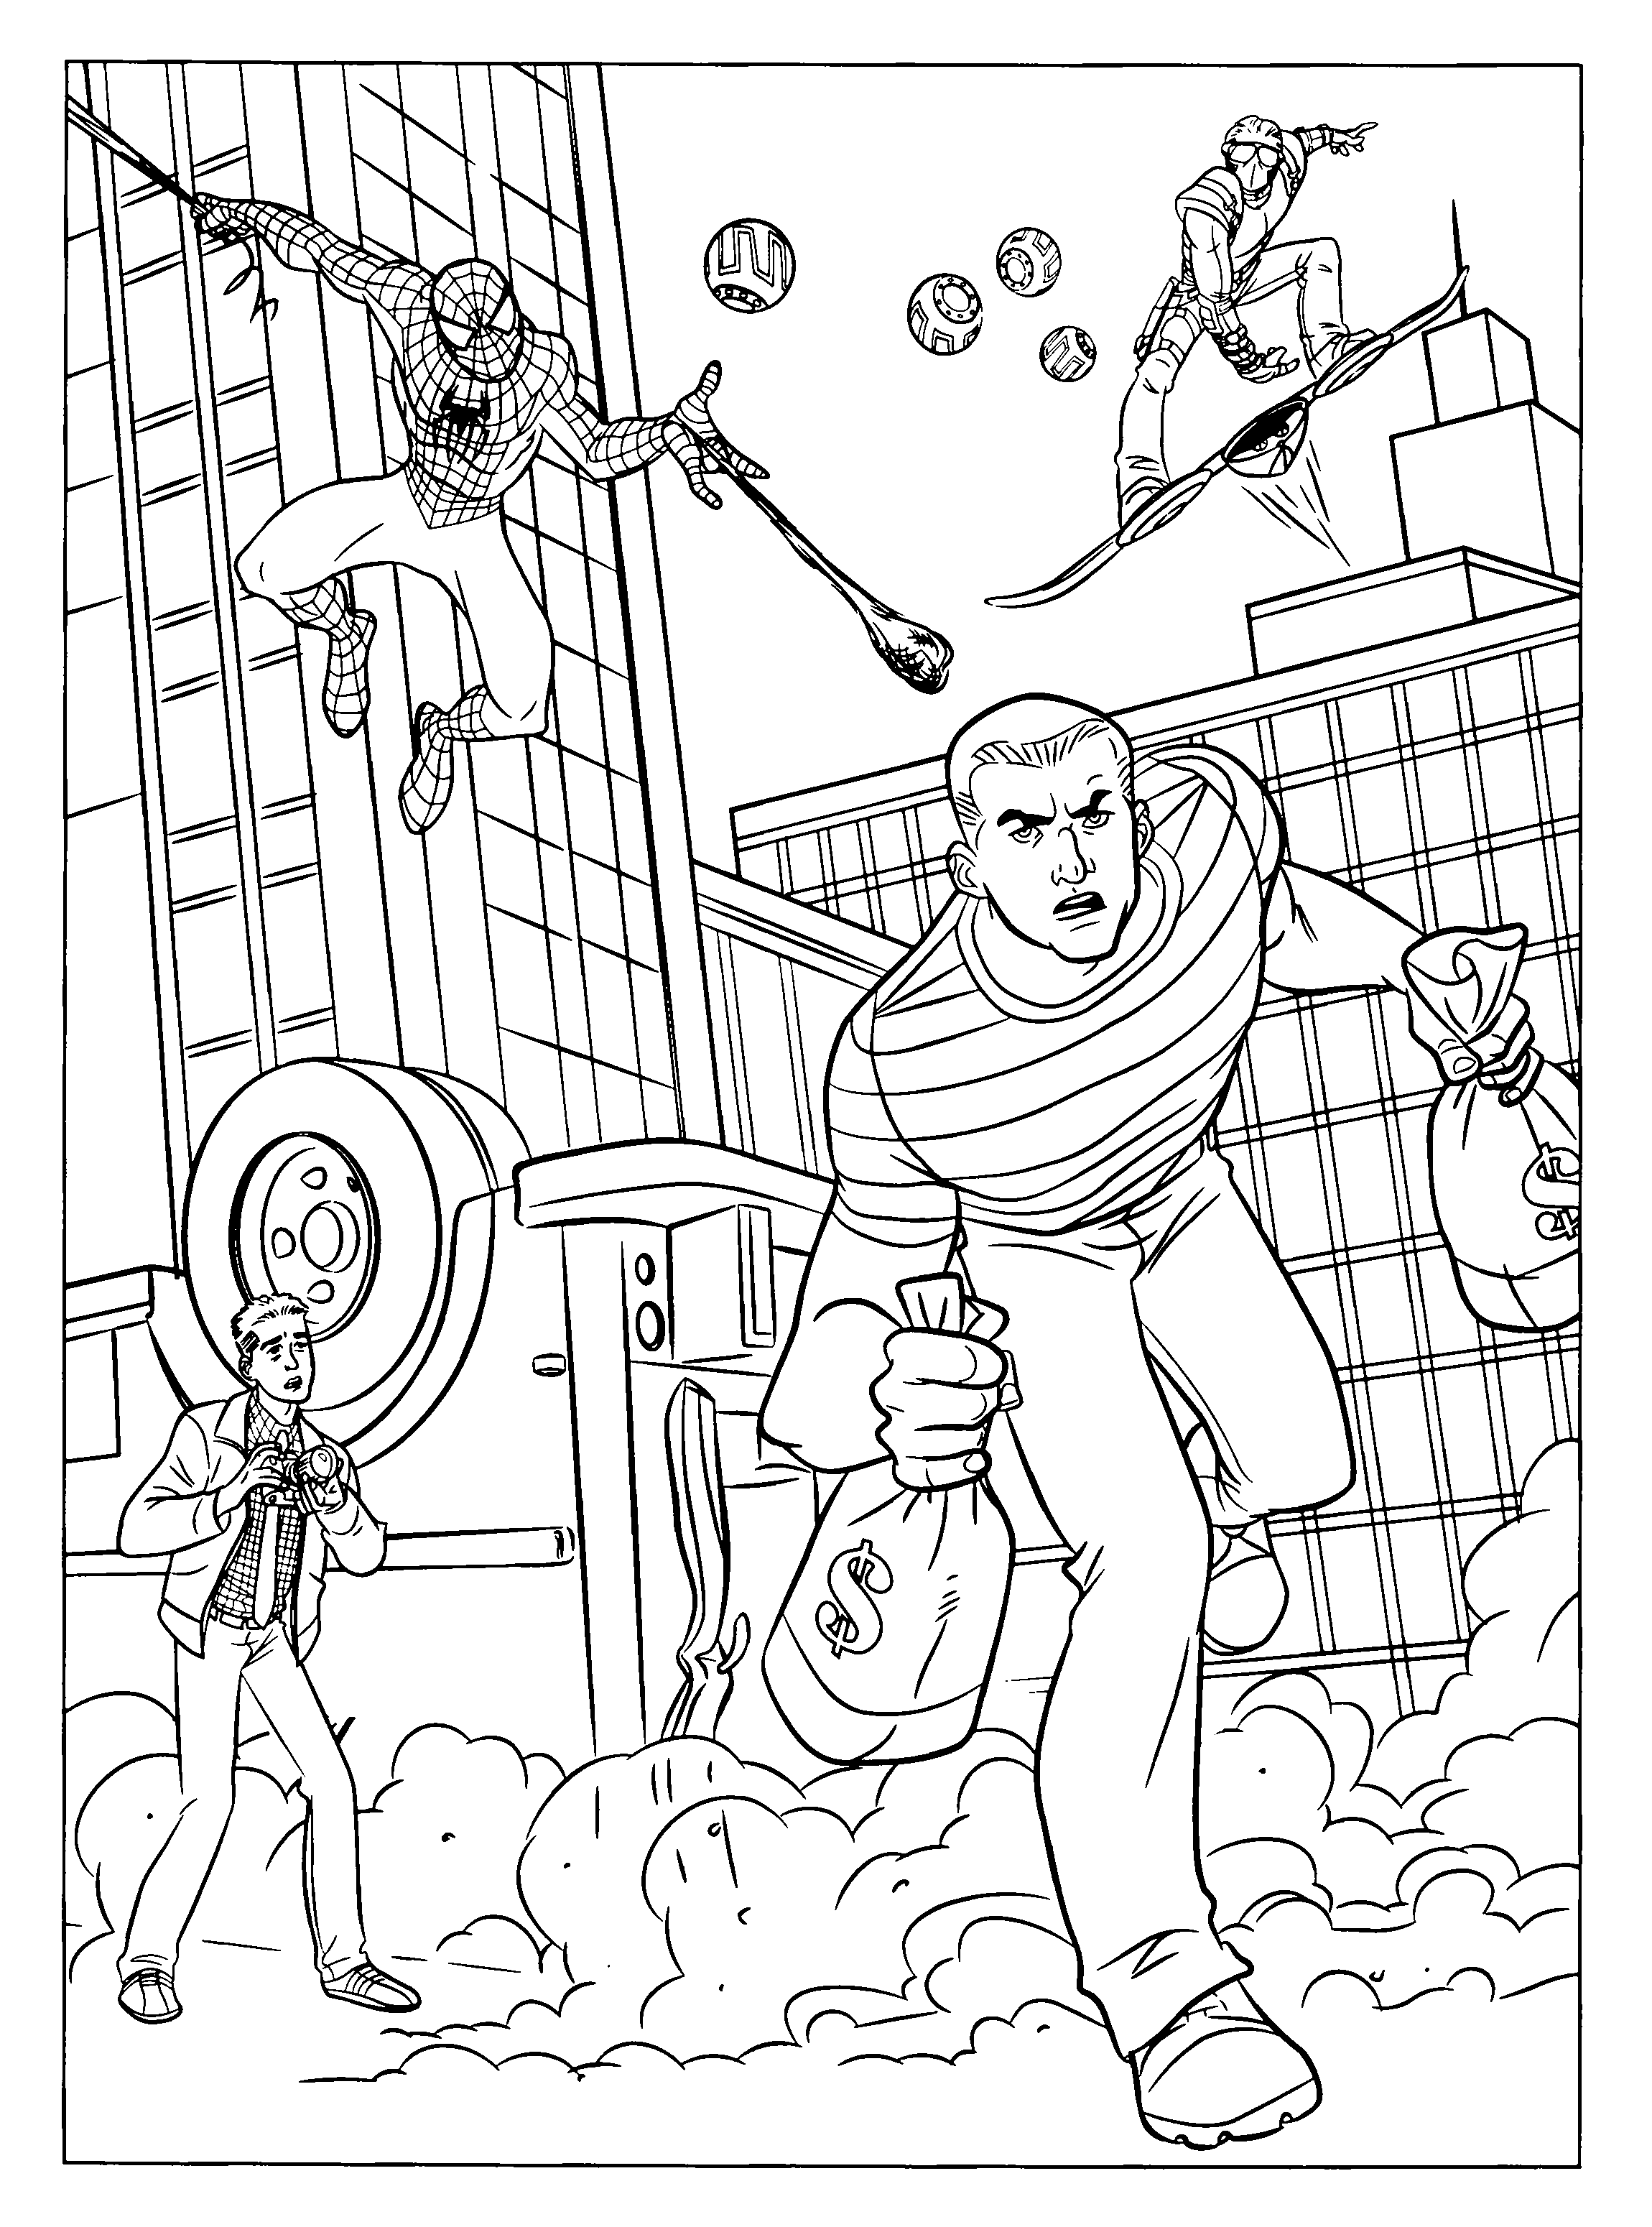 Spiderman Catching Bank Robber Coloring Page